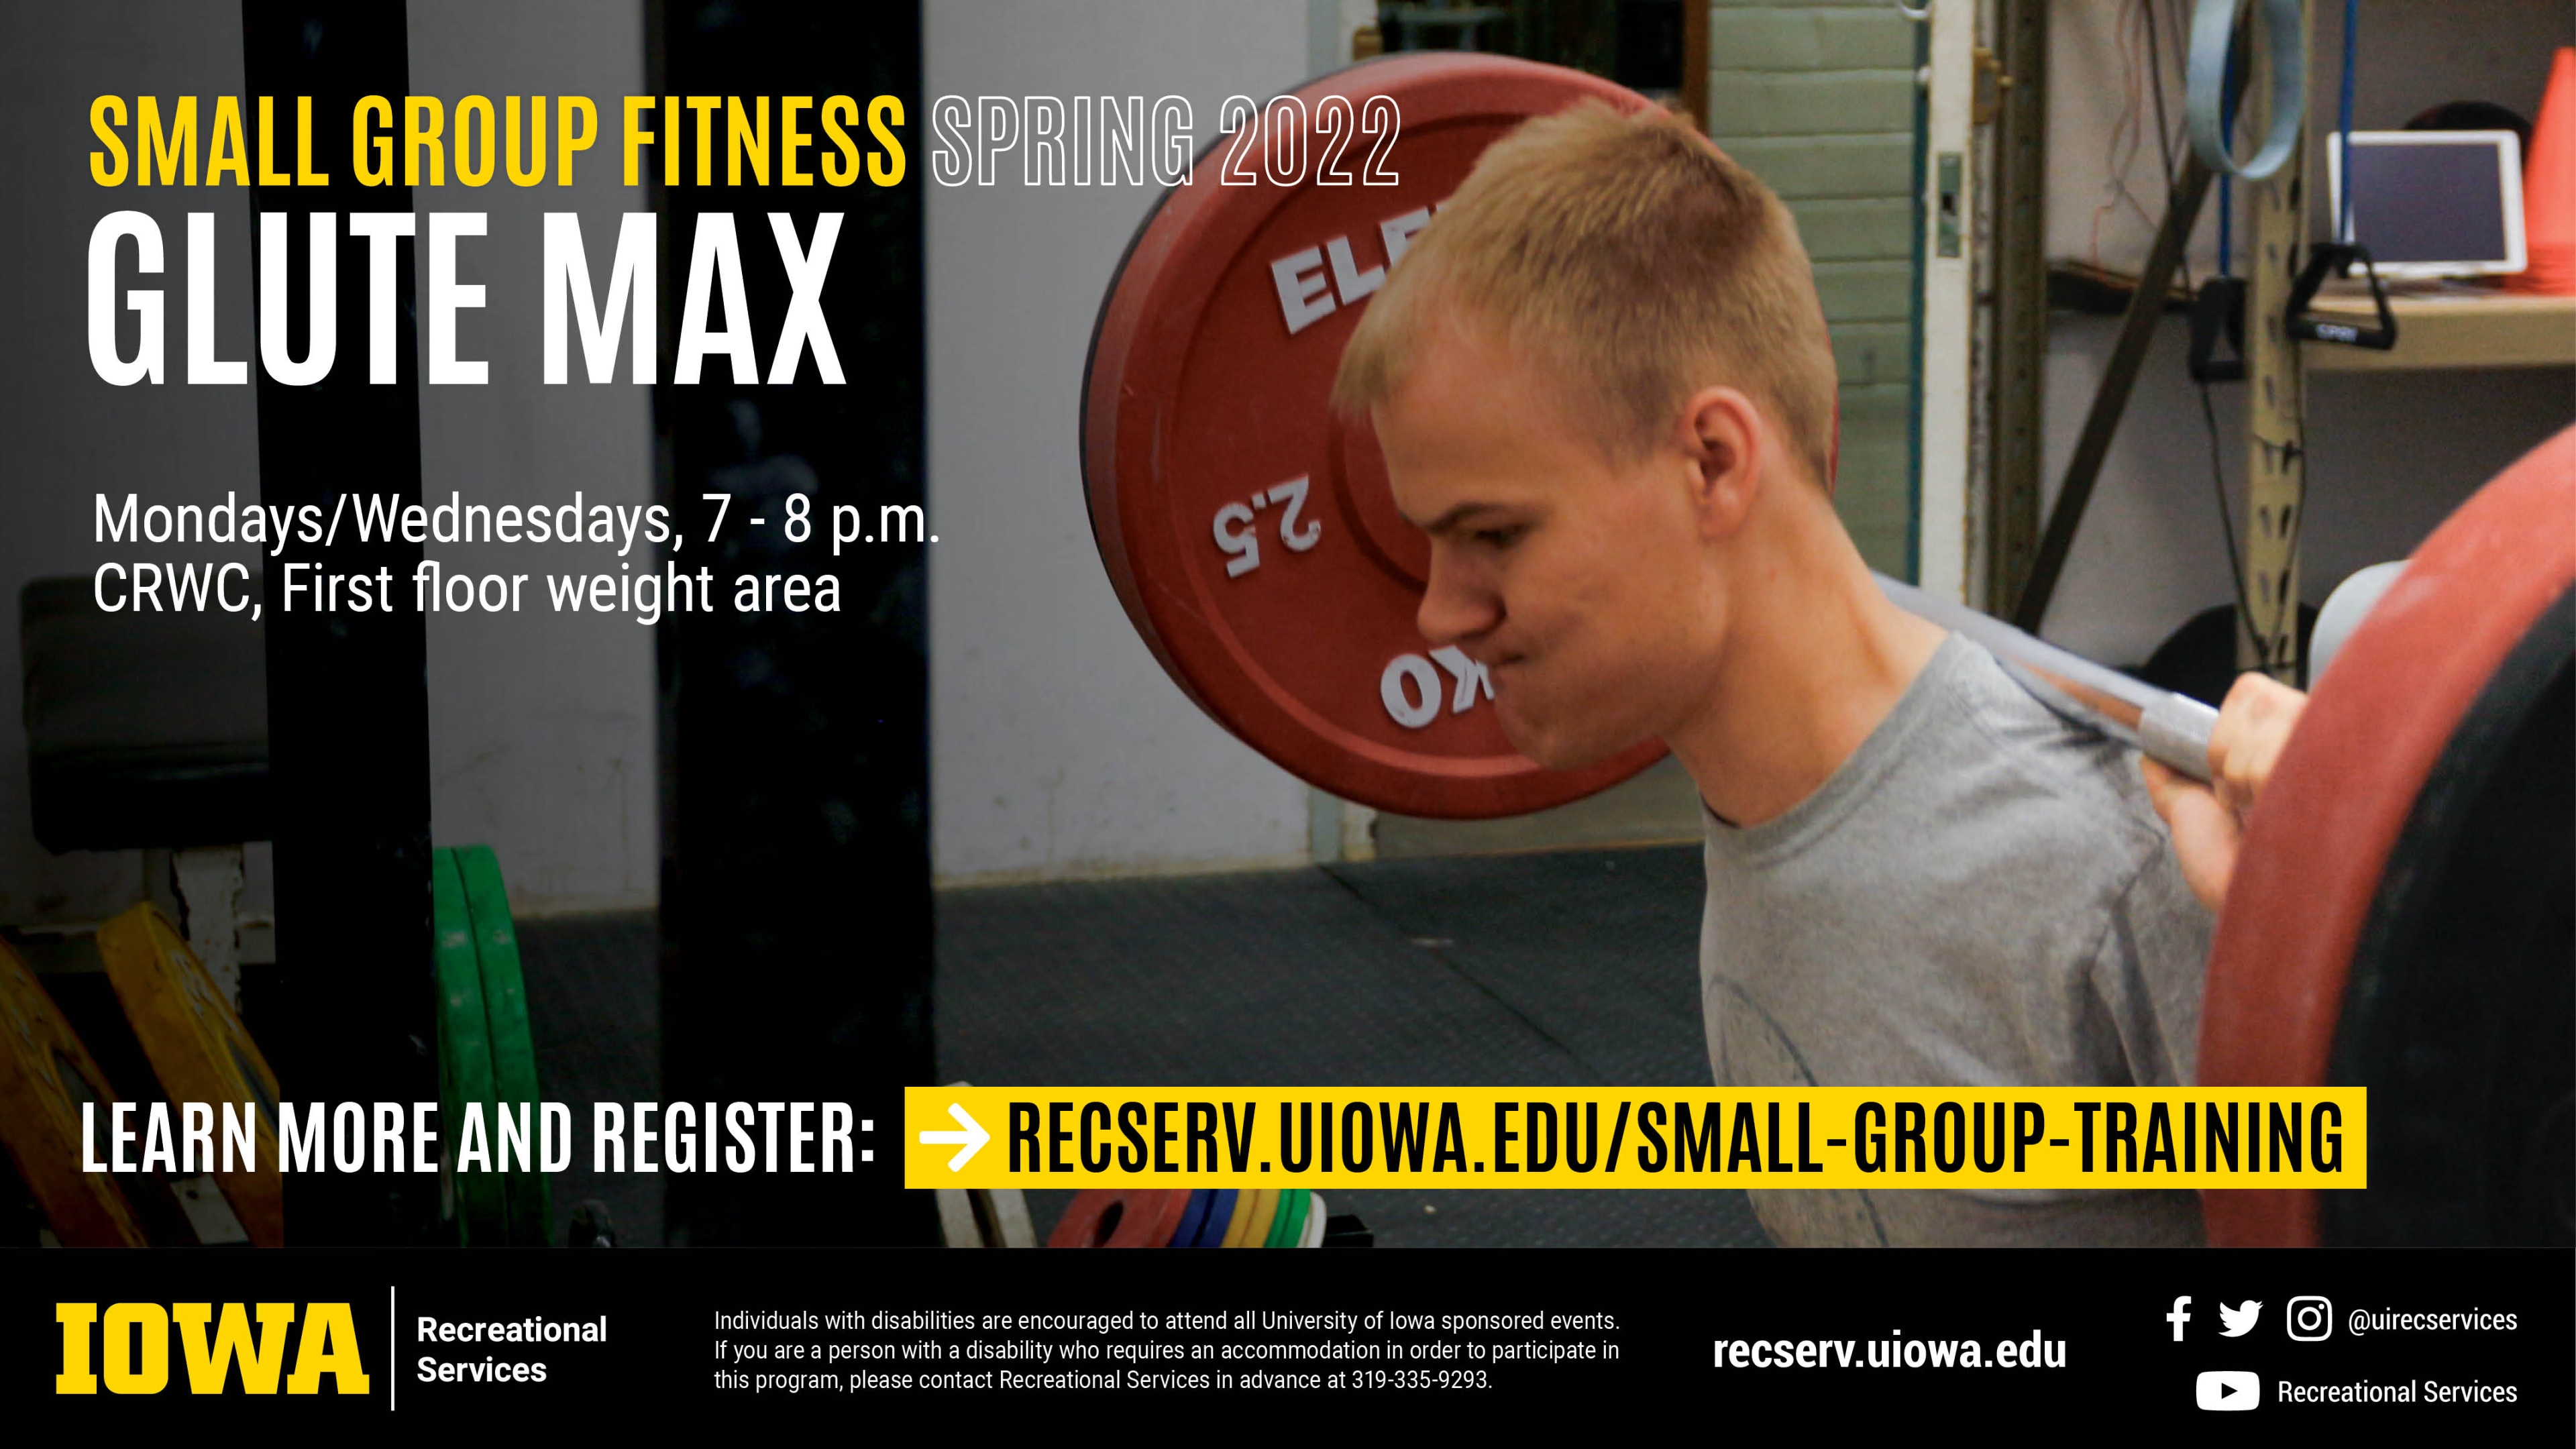 Small Group Fitness Spring 2022 Glute Max Mondays/Wednesdays 7 - 8 p.m. CRWC First floor weight room. Learn more and register: recserv.uiowa.edu/small-group-training